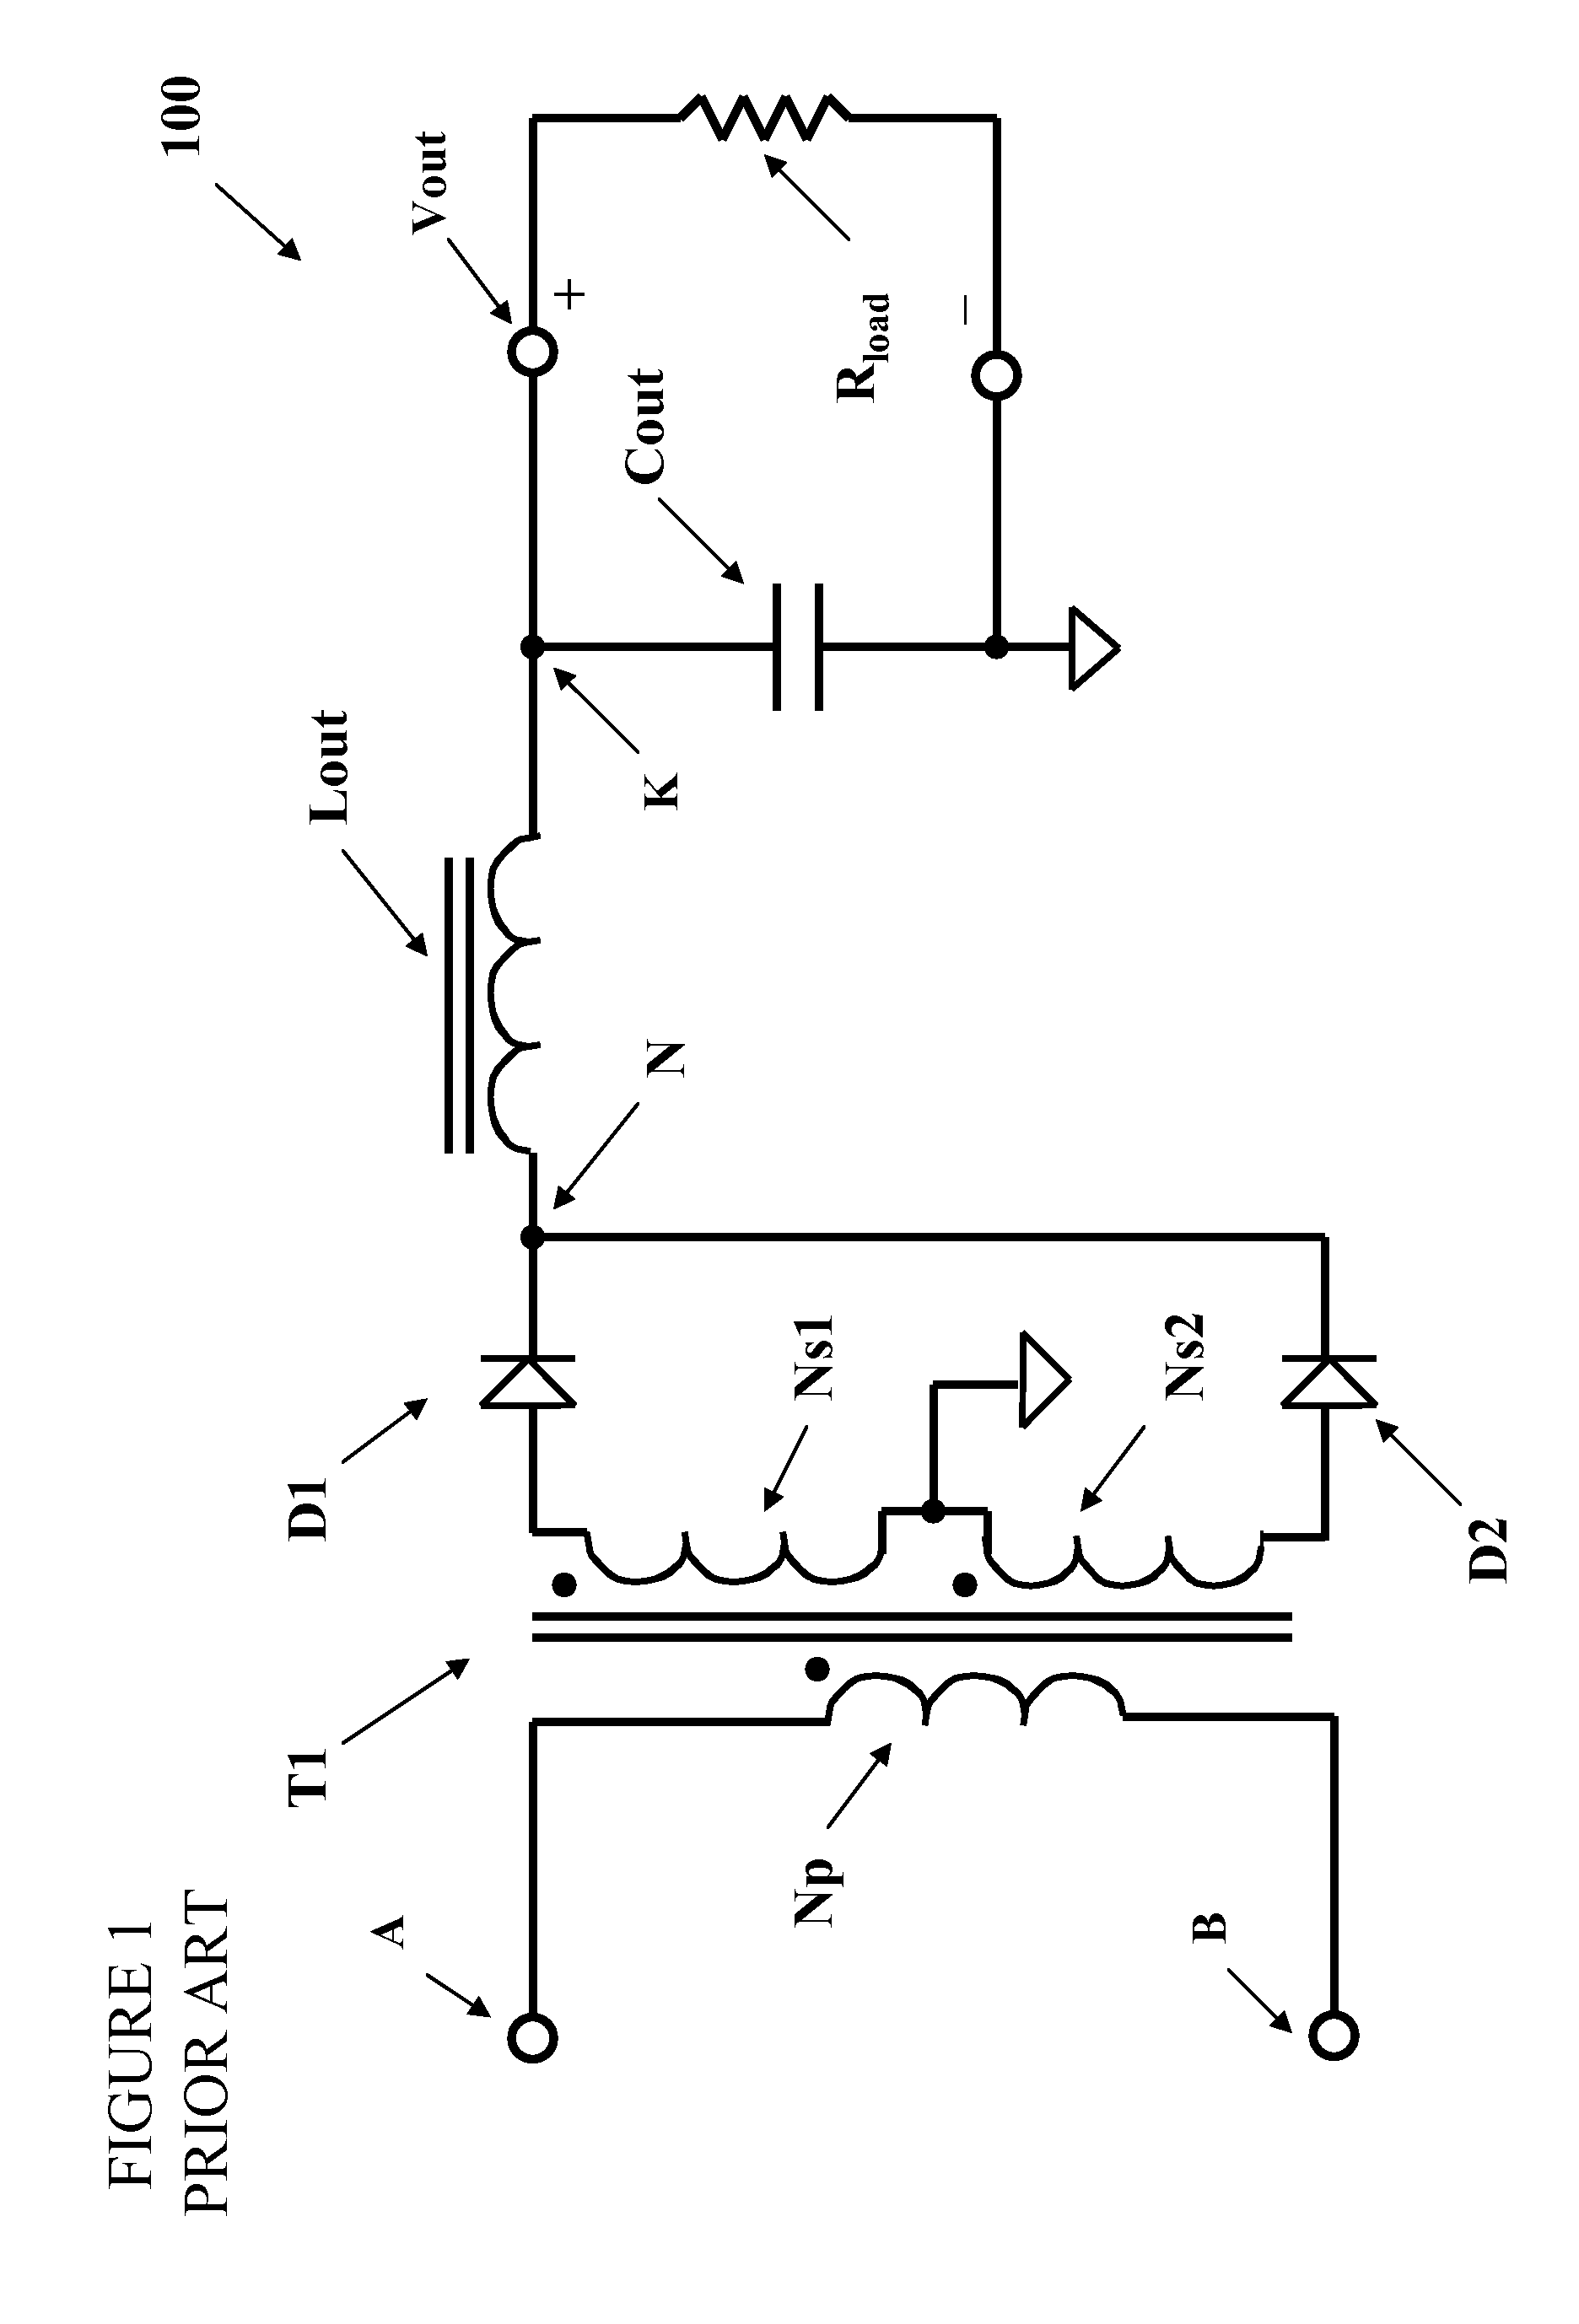 Ripple Reduction for Switch-Mode Power Conversion